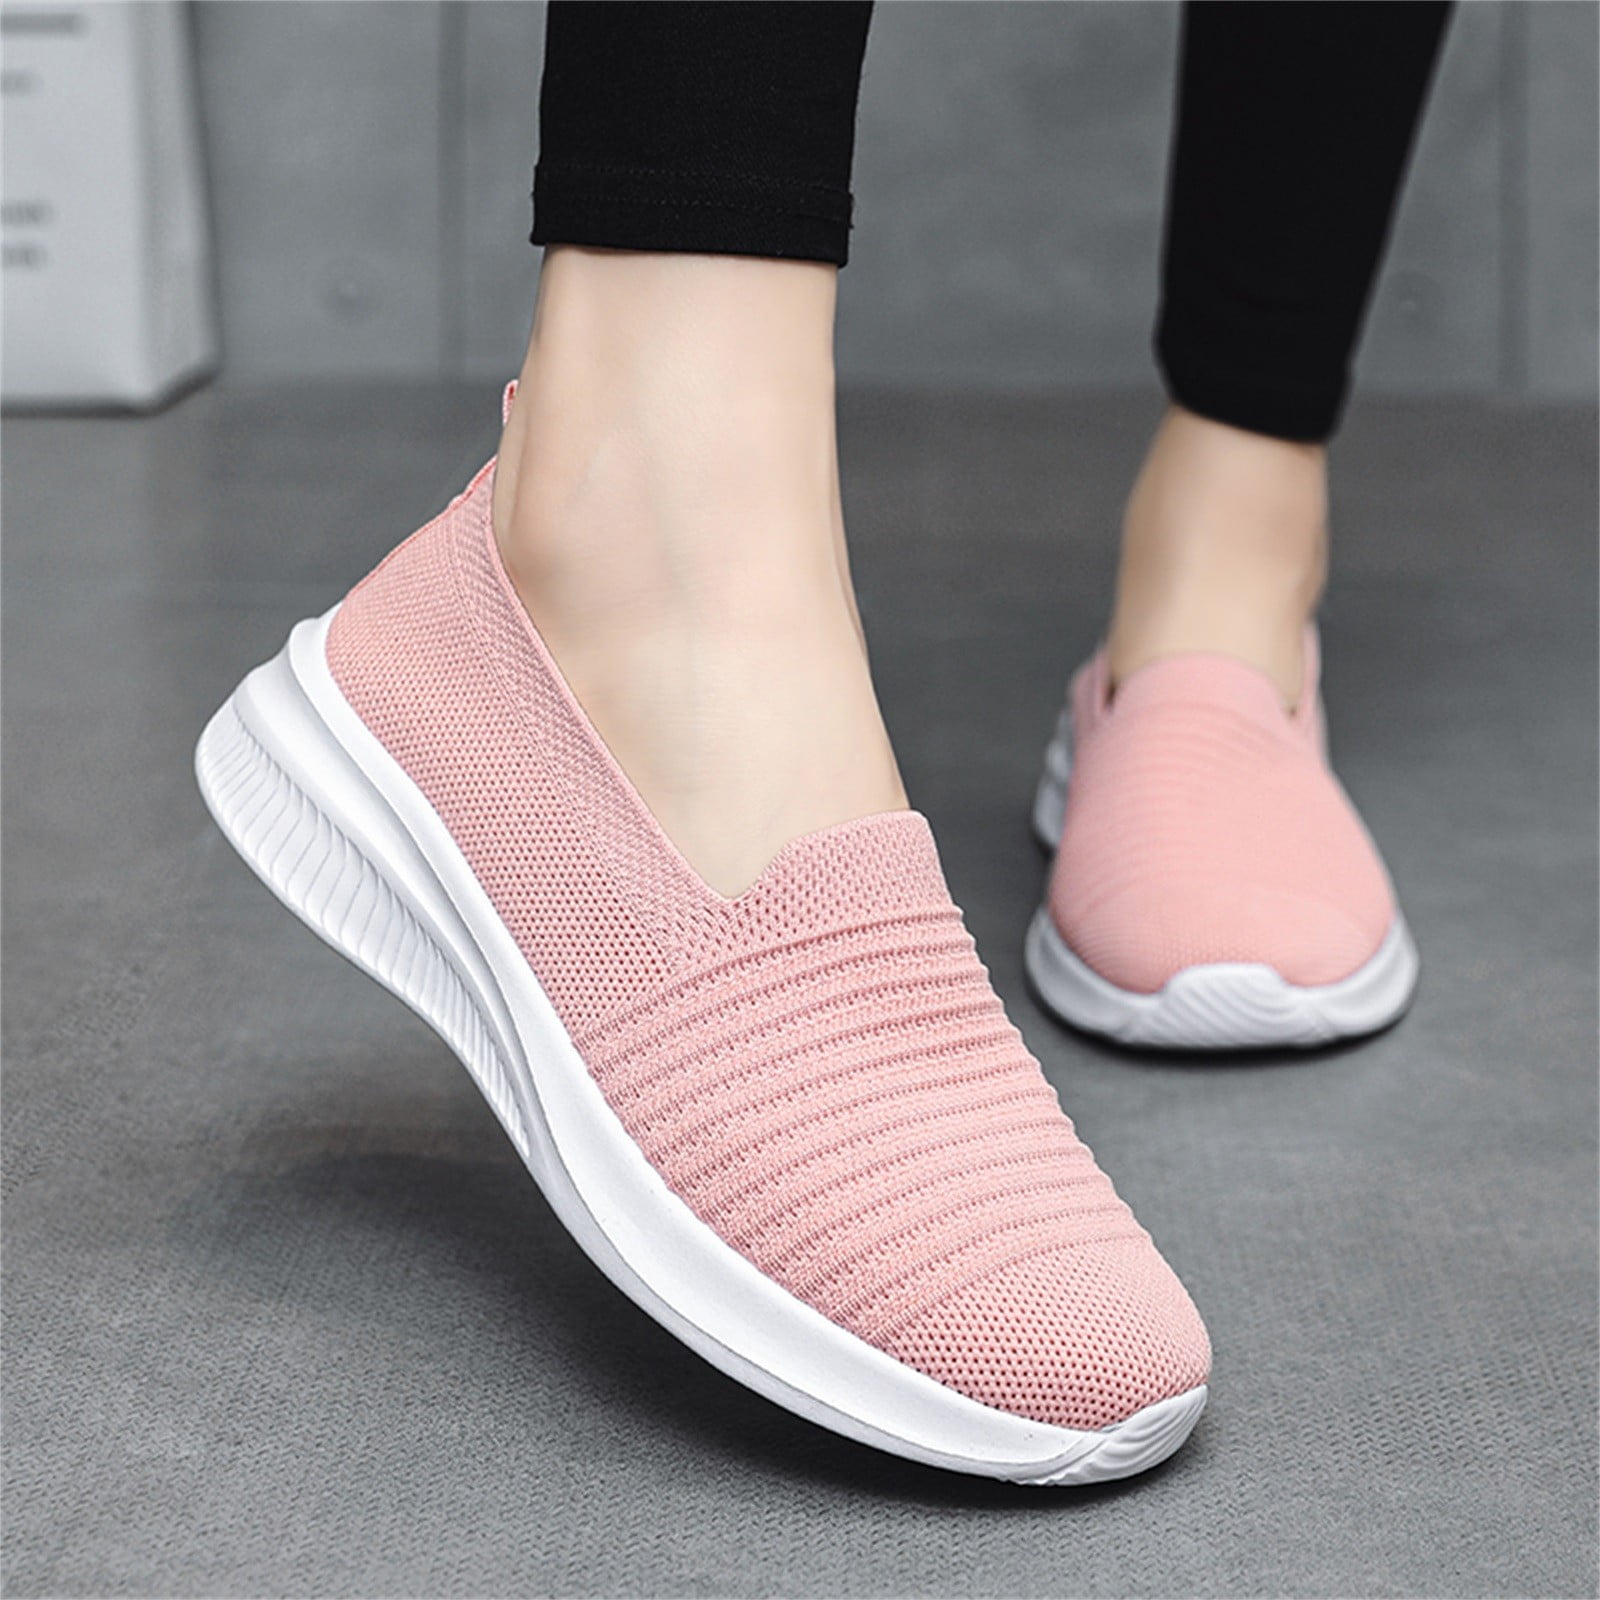 asian Riya-51 sports shoes for women without laces | Running shoes for girls  stylish latest design new fashion | casual sneakers for ladies | Slip on  firozi shoes for jogging, walking, gym